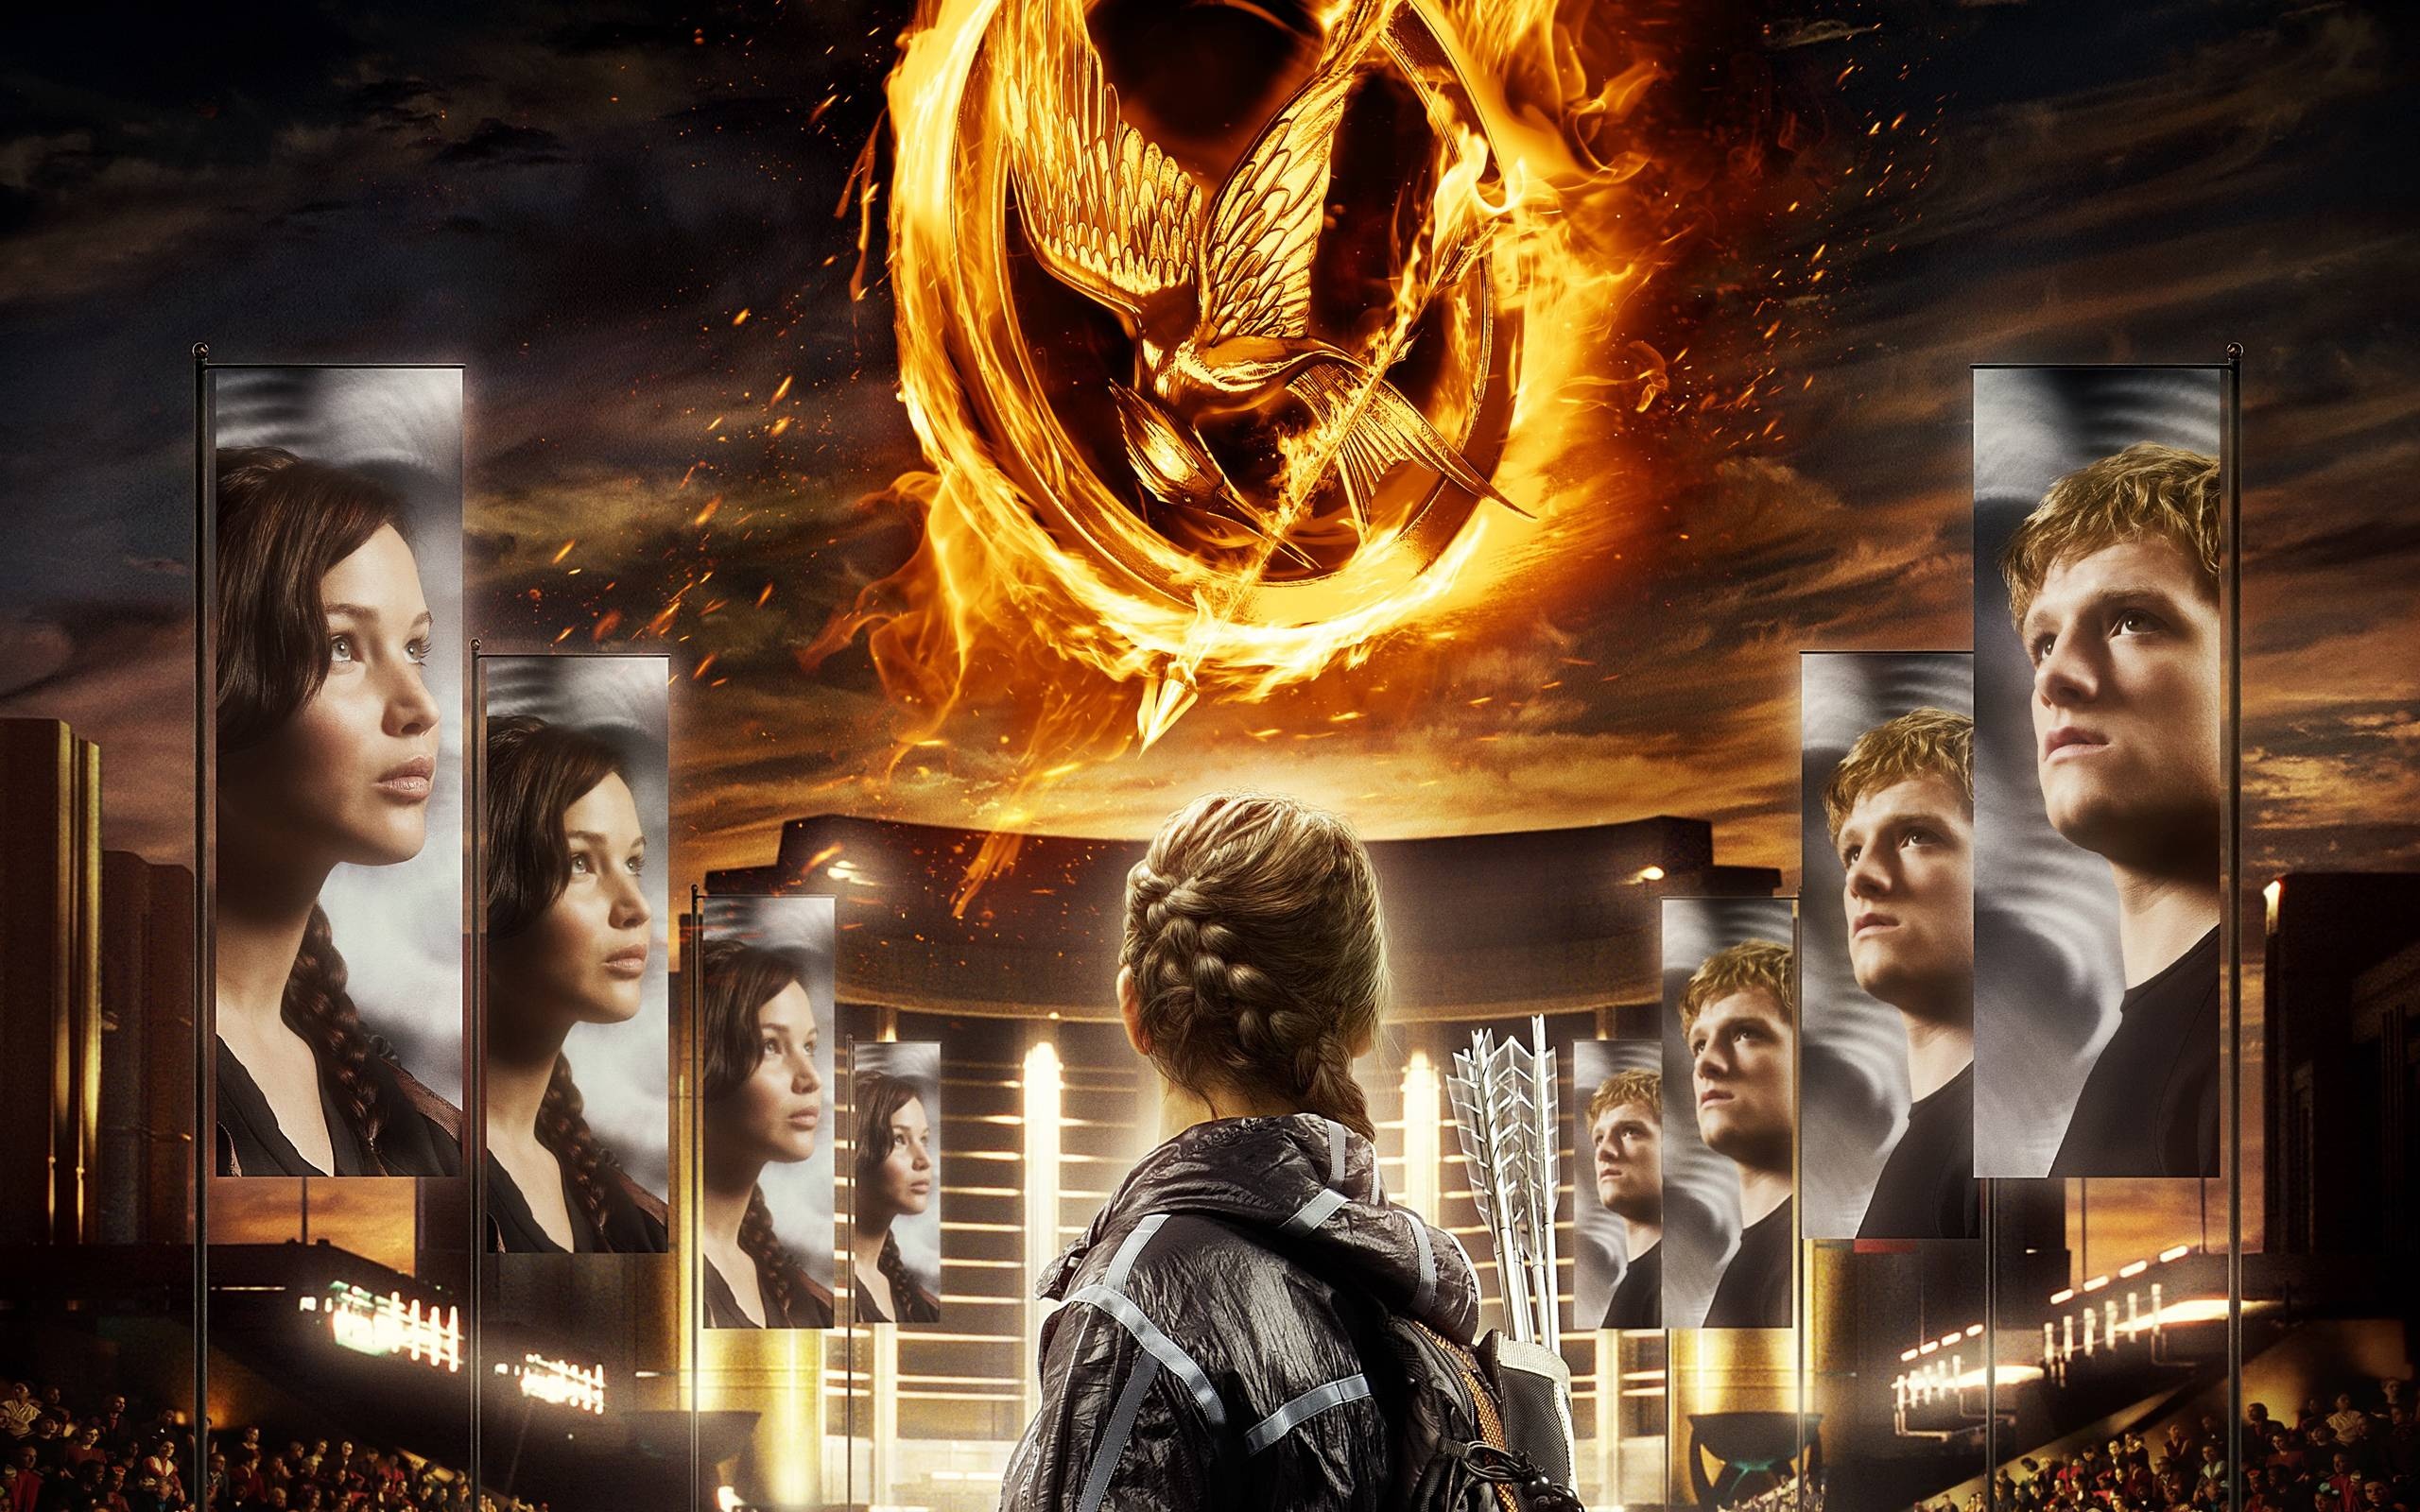 Hunger Games: The second movie in the franchise, Catching Fire, was released in 2013. 2560x1600 HD Background.